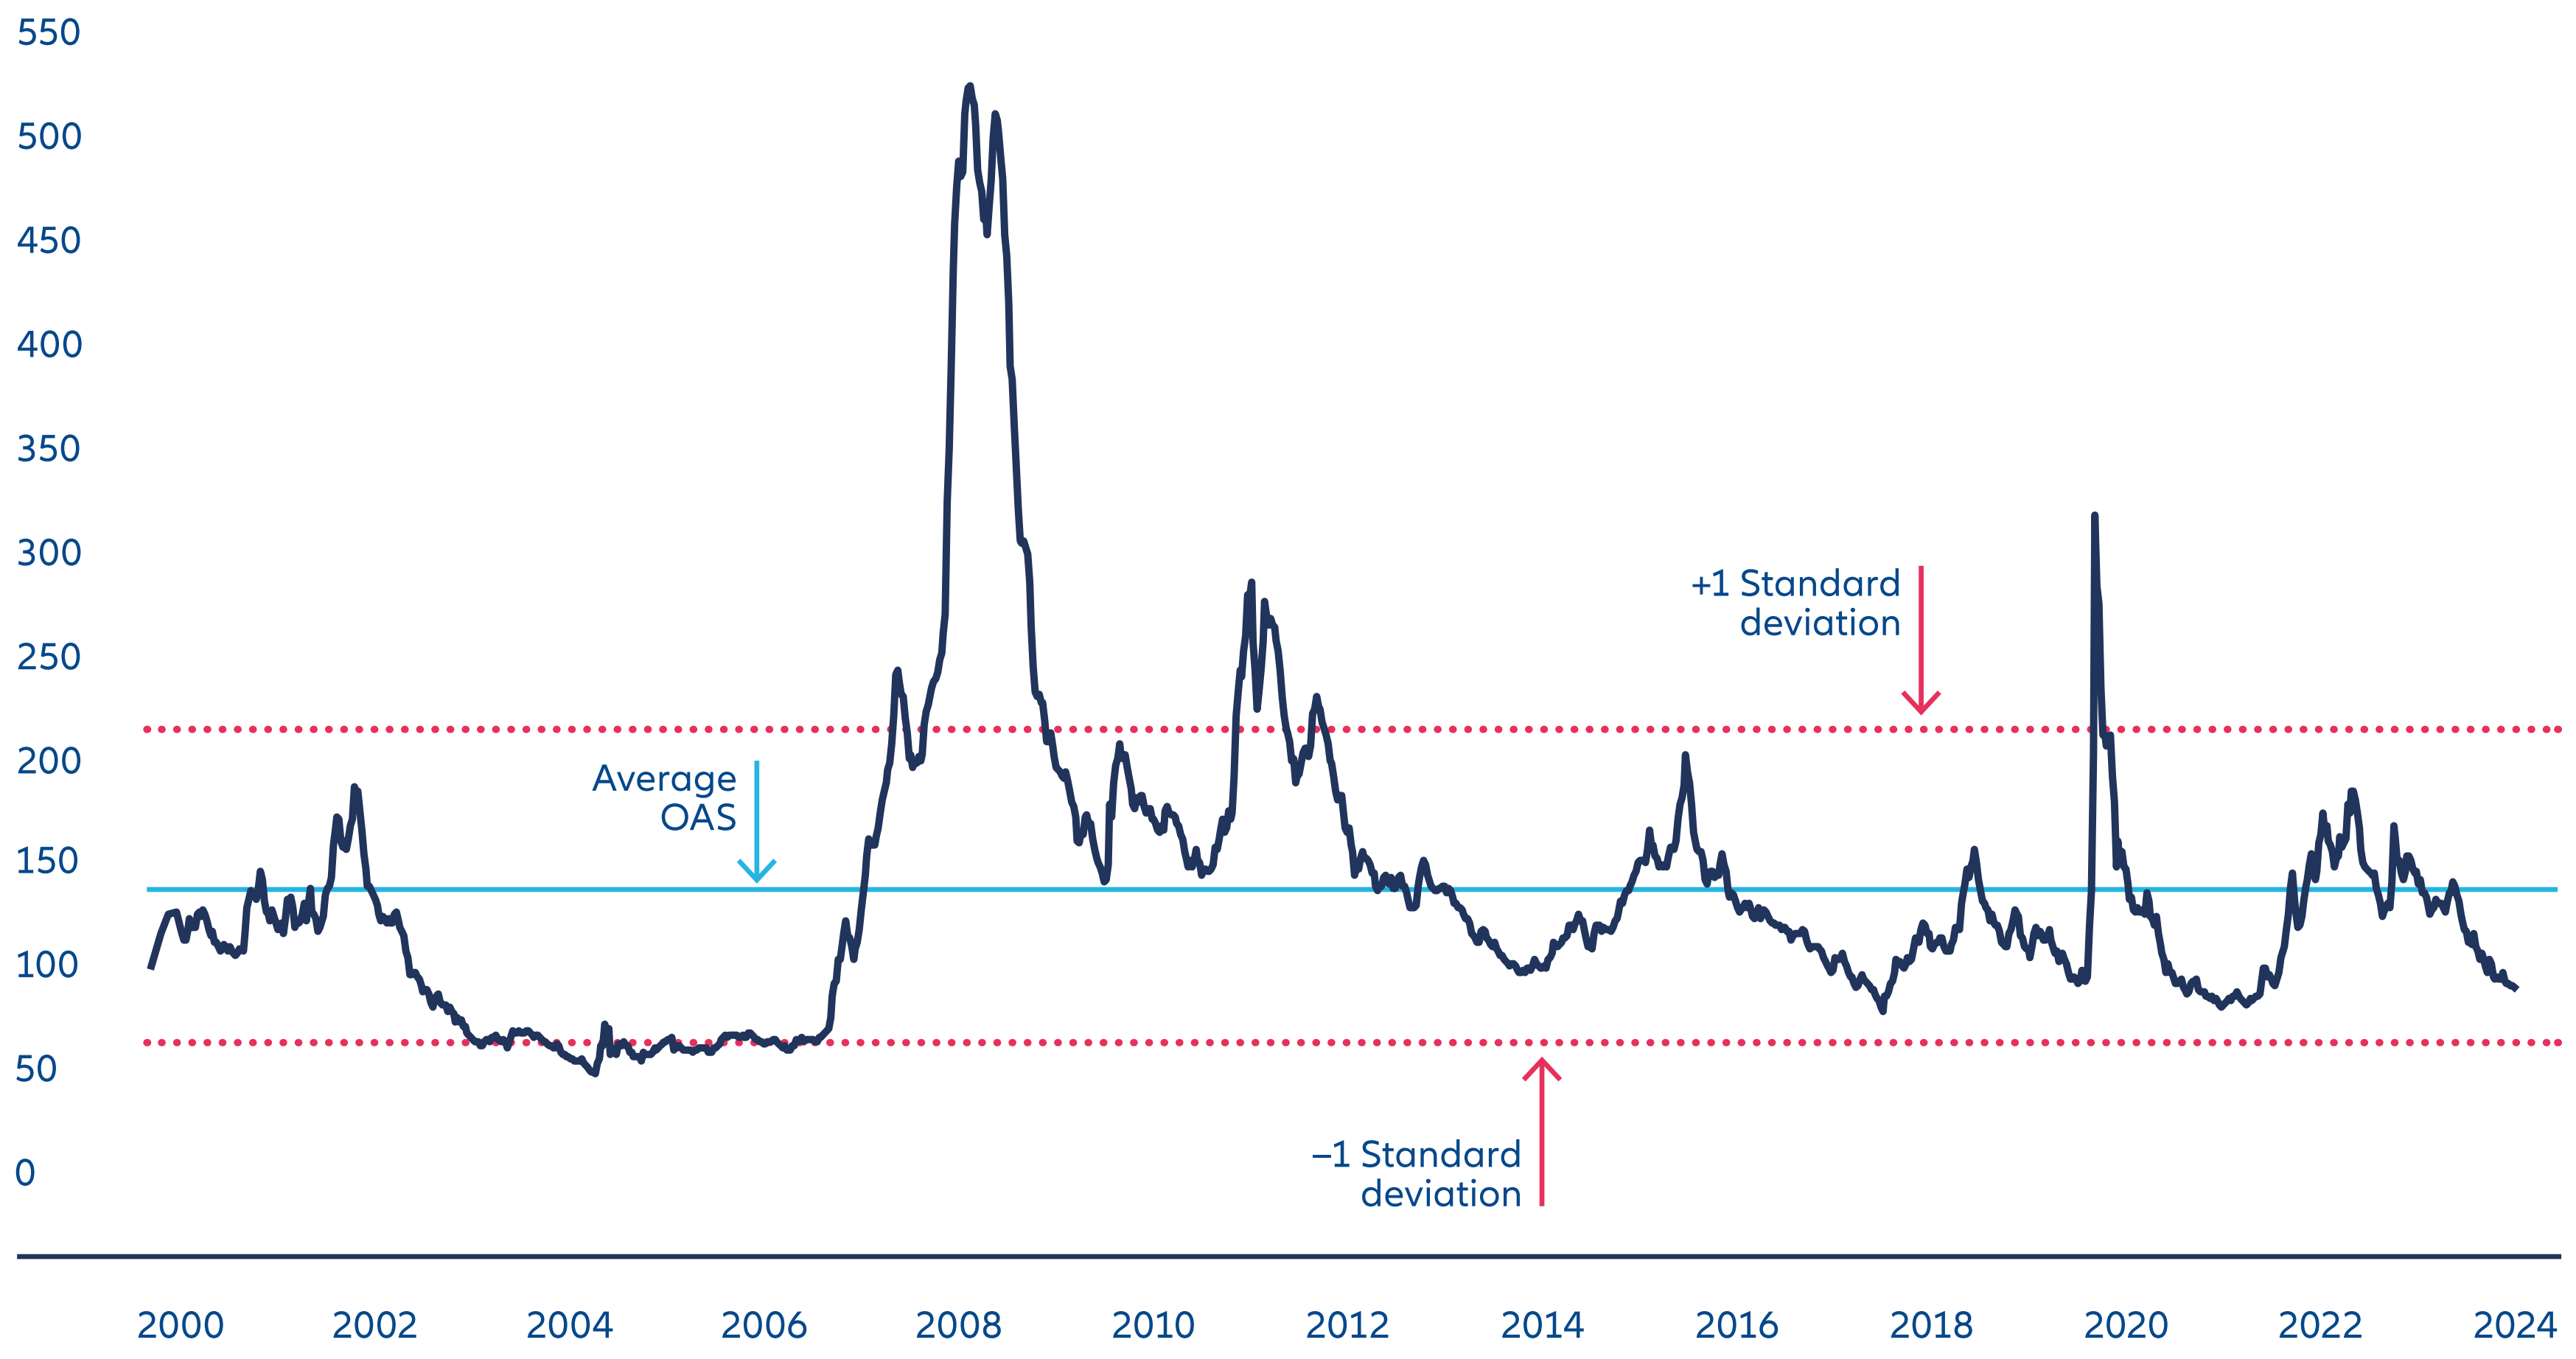 Exhibit 3: Corporate bond spreads close to recent lows